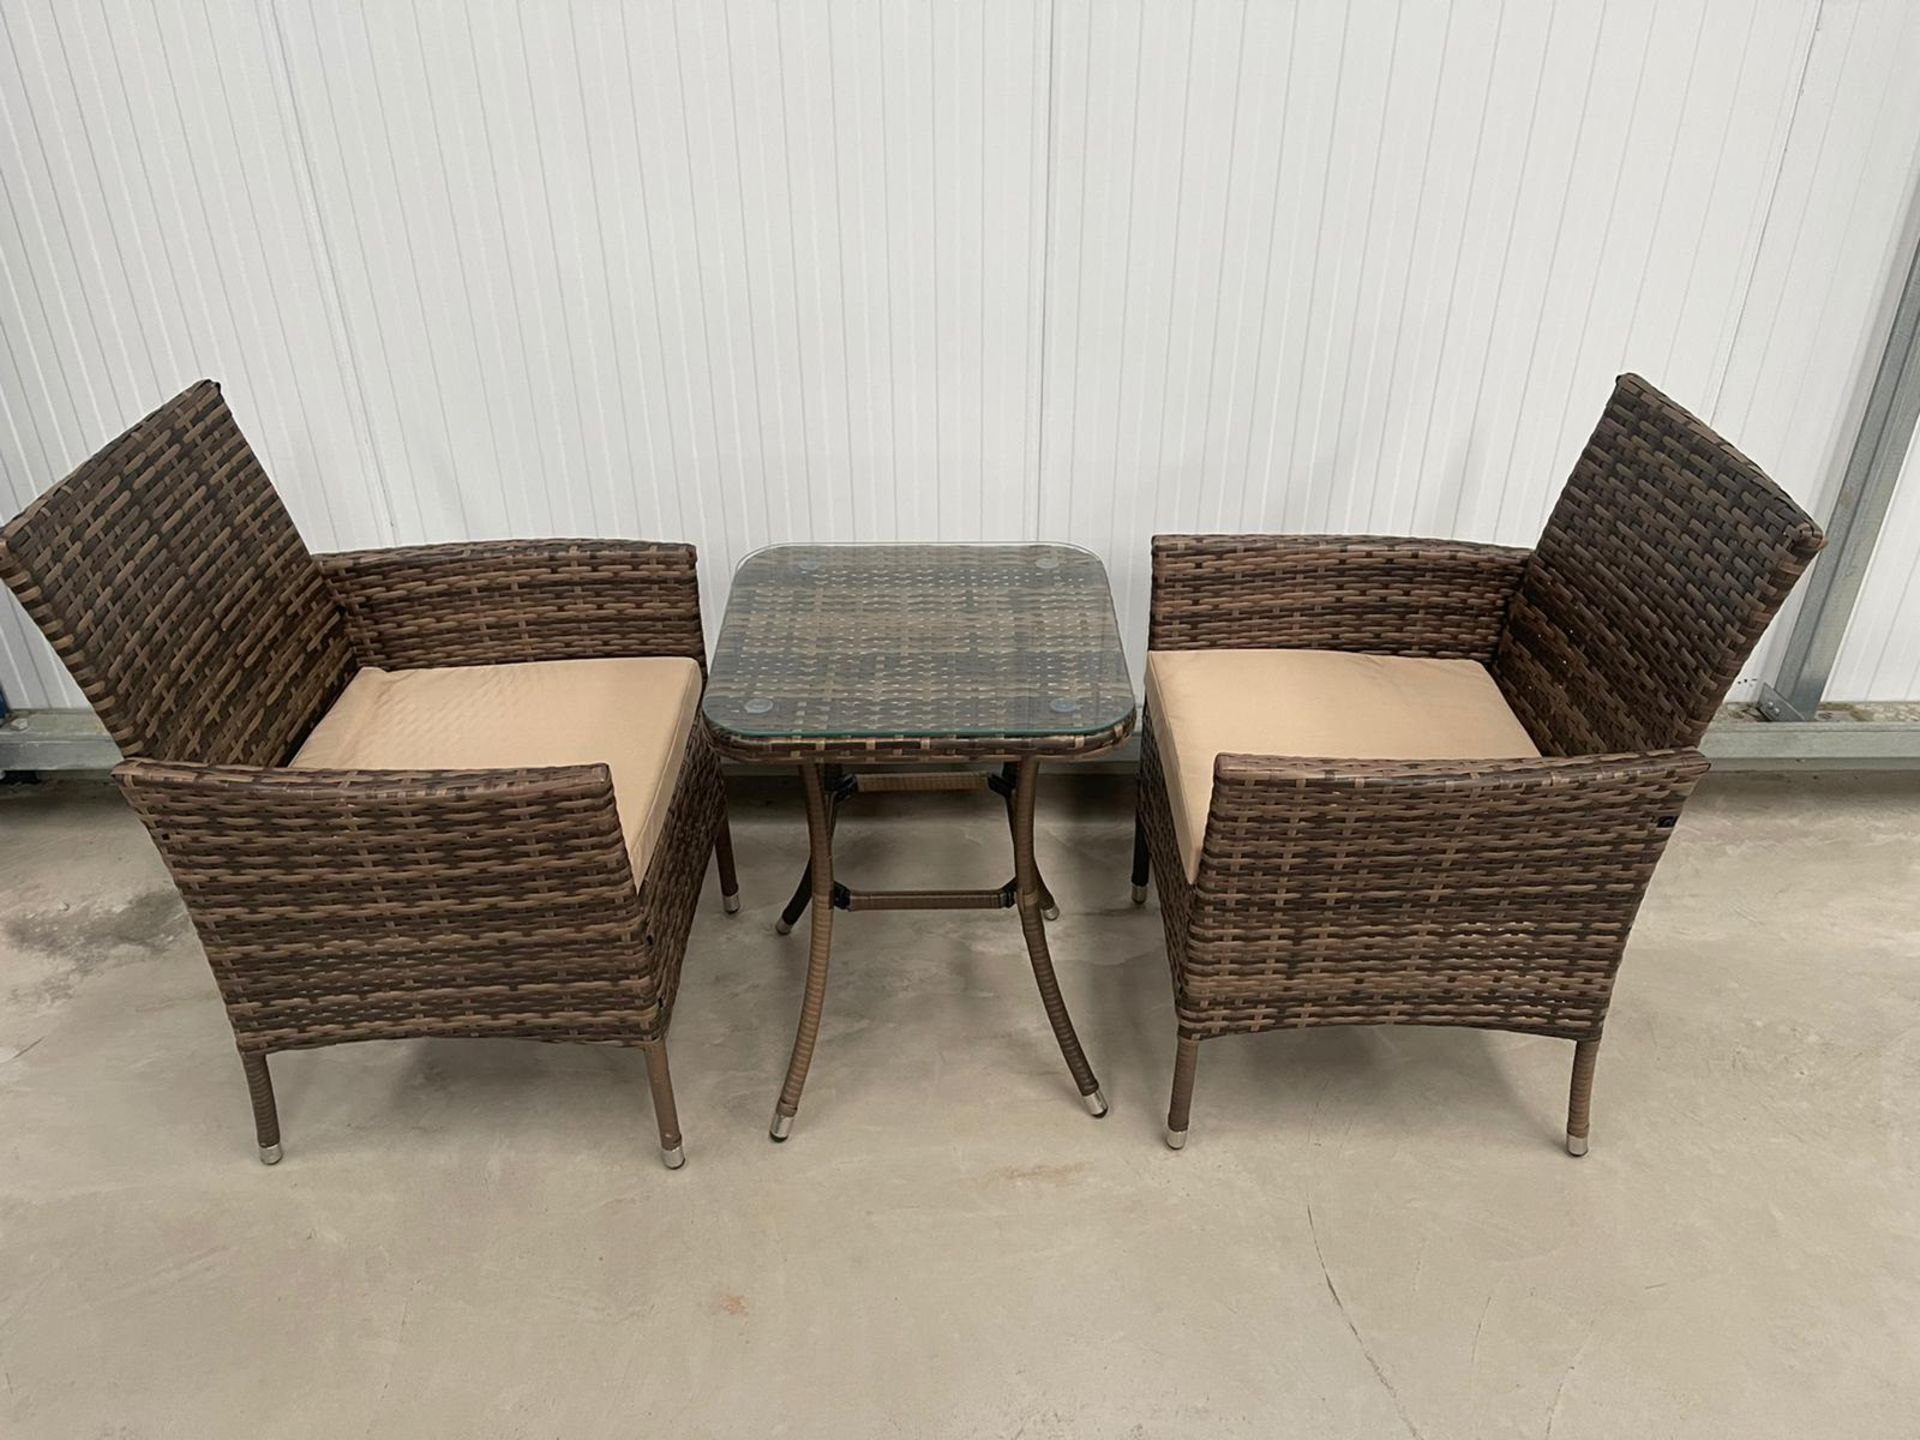 RRP £229 - NEW BROWN BISTRO SET WITH TALL TABLE. TABLE 46 X 46 X 62CM, CHAIR 51 X 60 X 83XM - Image 2 of 4